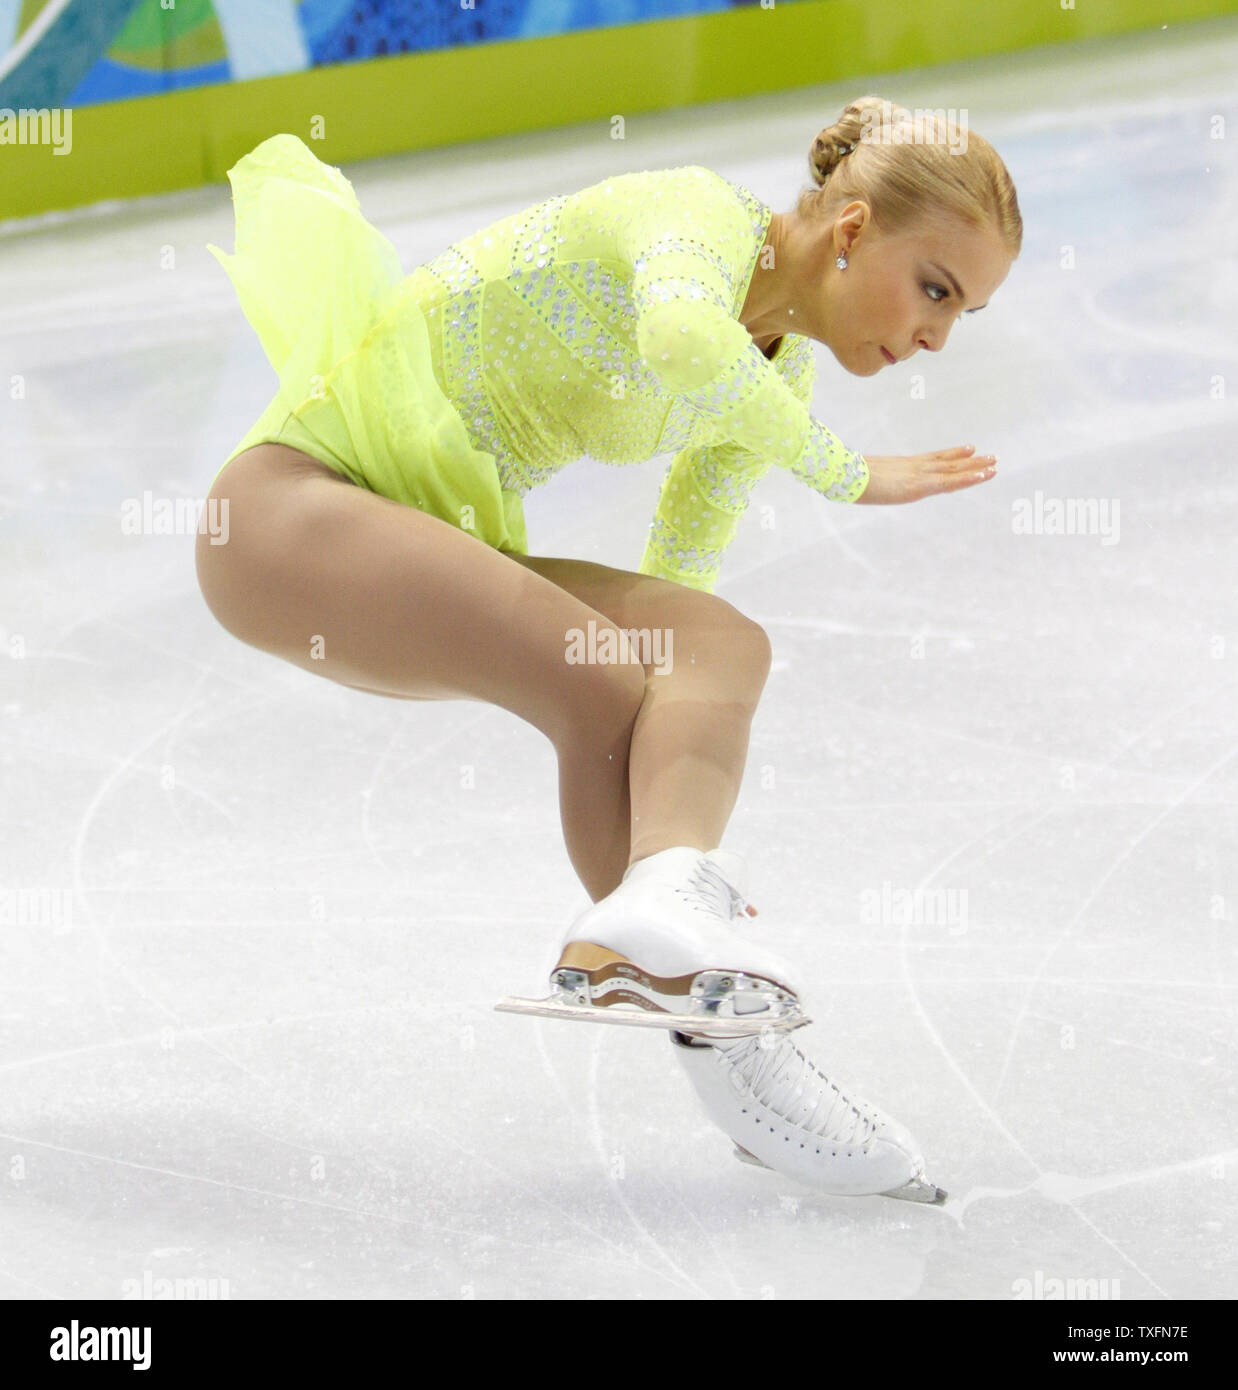 Kiira Korpi of Finland falls as she skates her short program in the women's figure competition at the 2010 Winter Olympics in Vancouver, Canada on February 23, 2010.     UPI/Brian Kersey Stock Photo